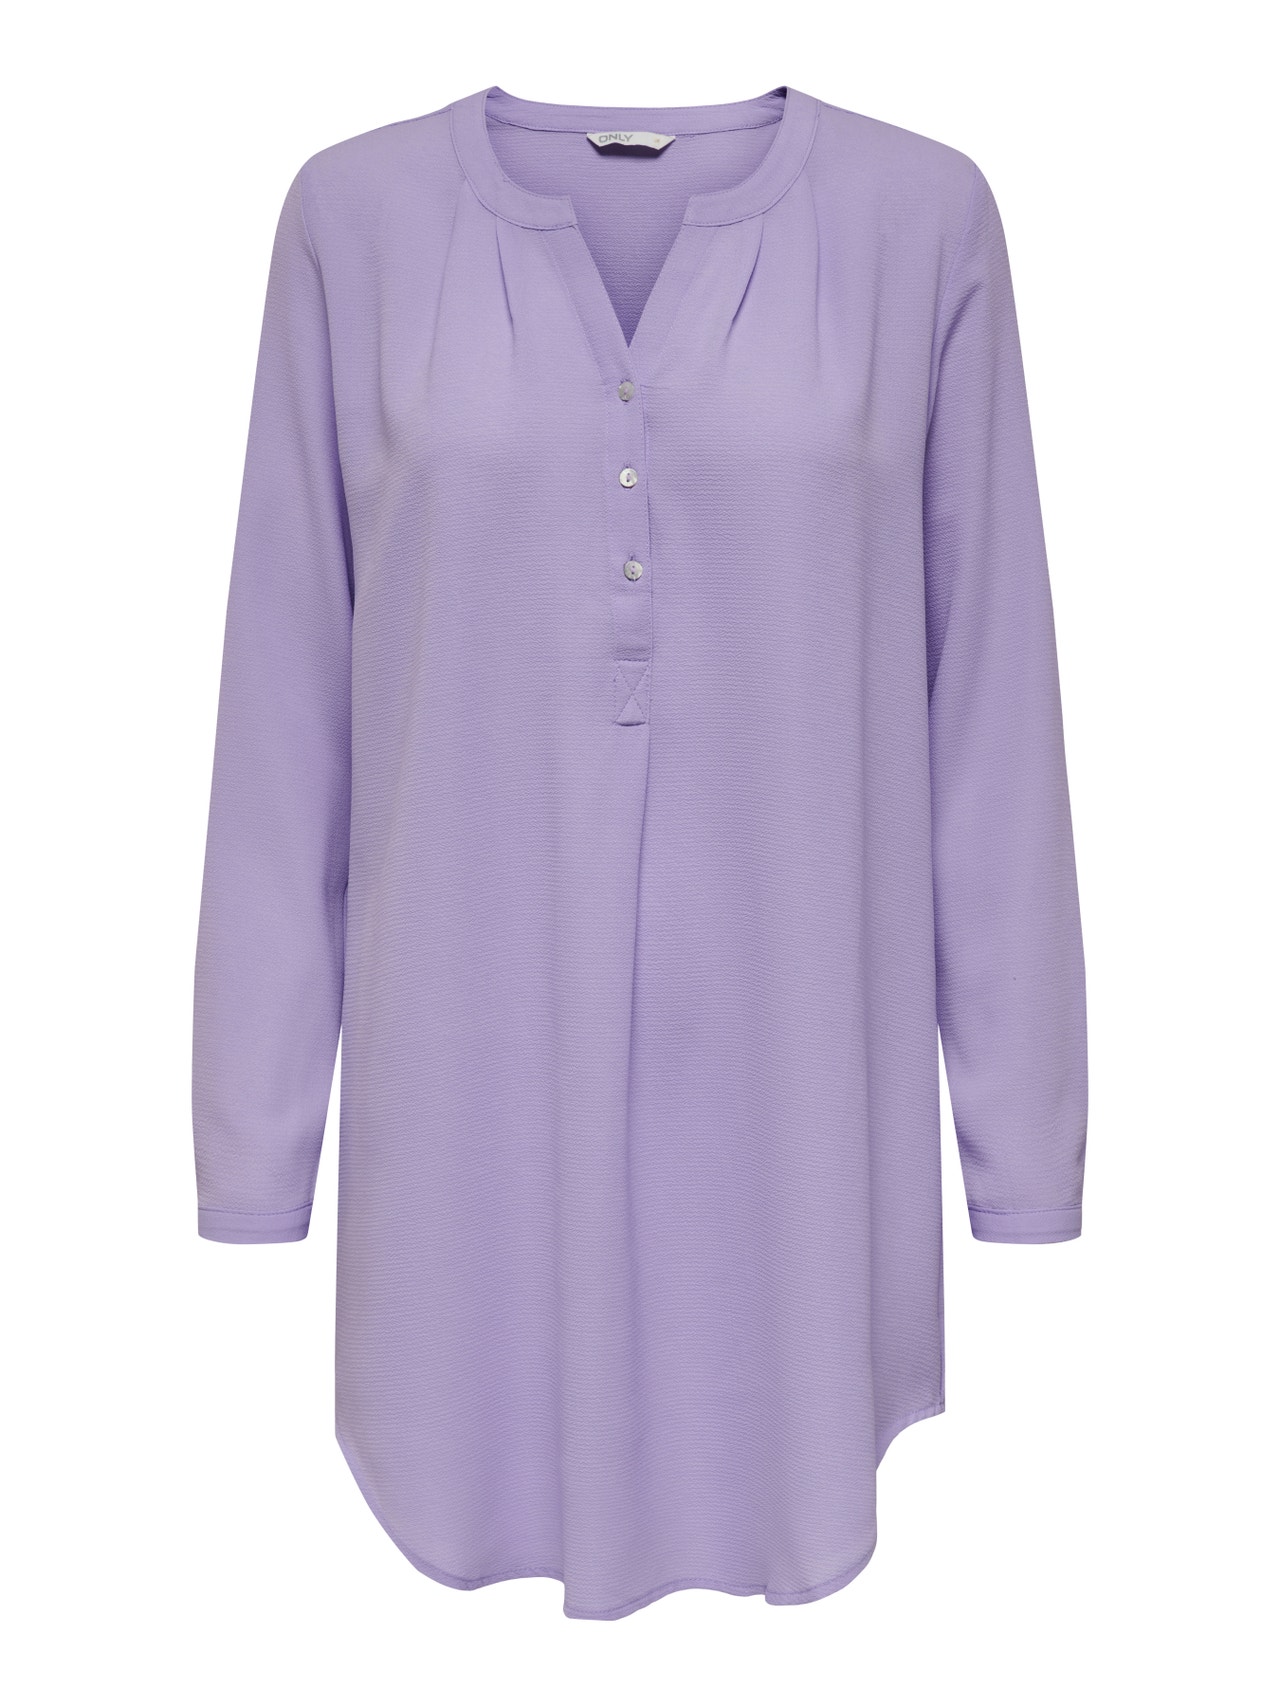 ONLY China Collar shirt -Lavender - 15158111